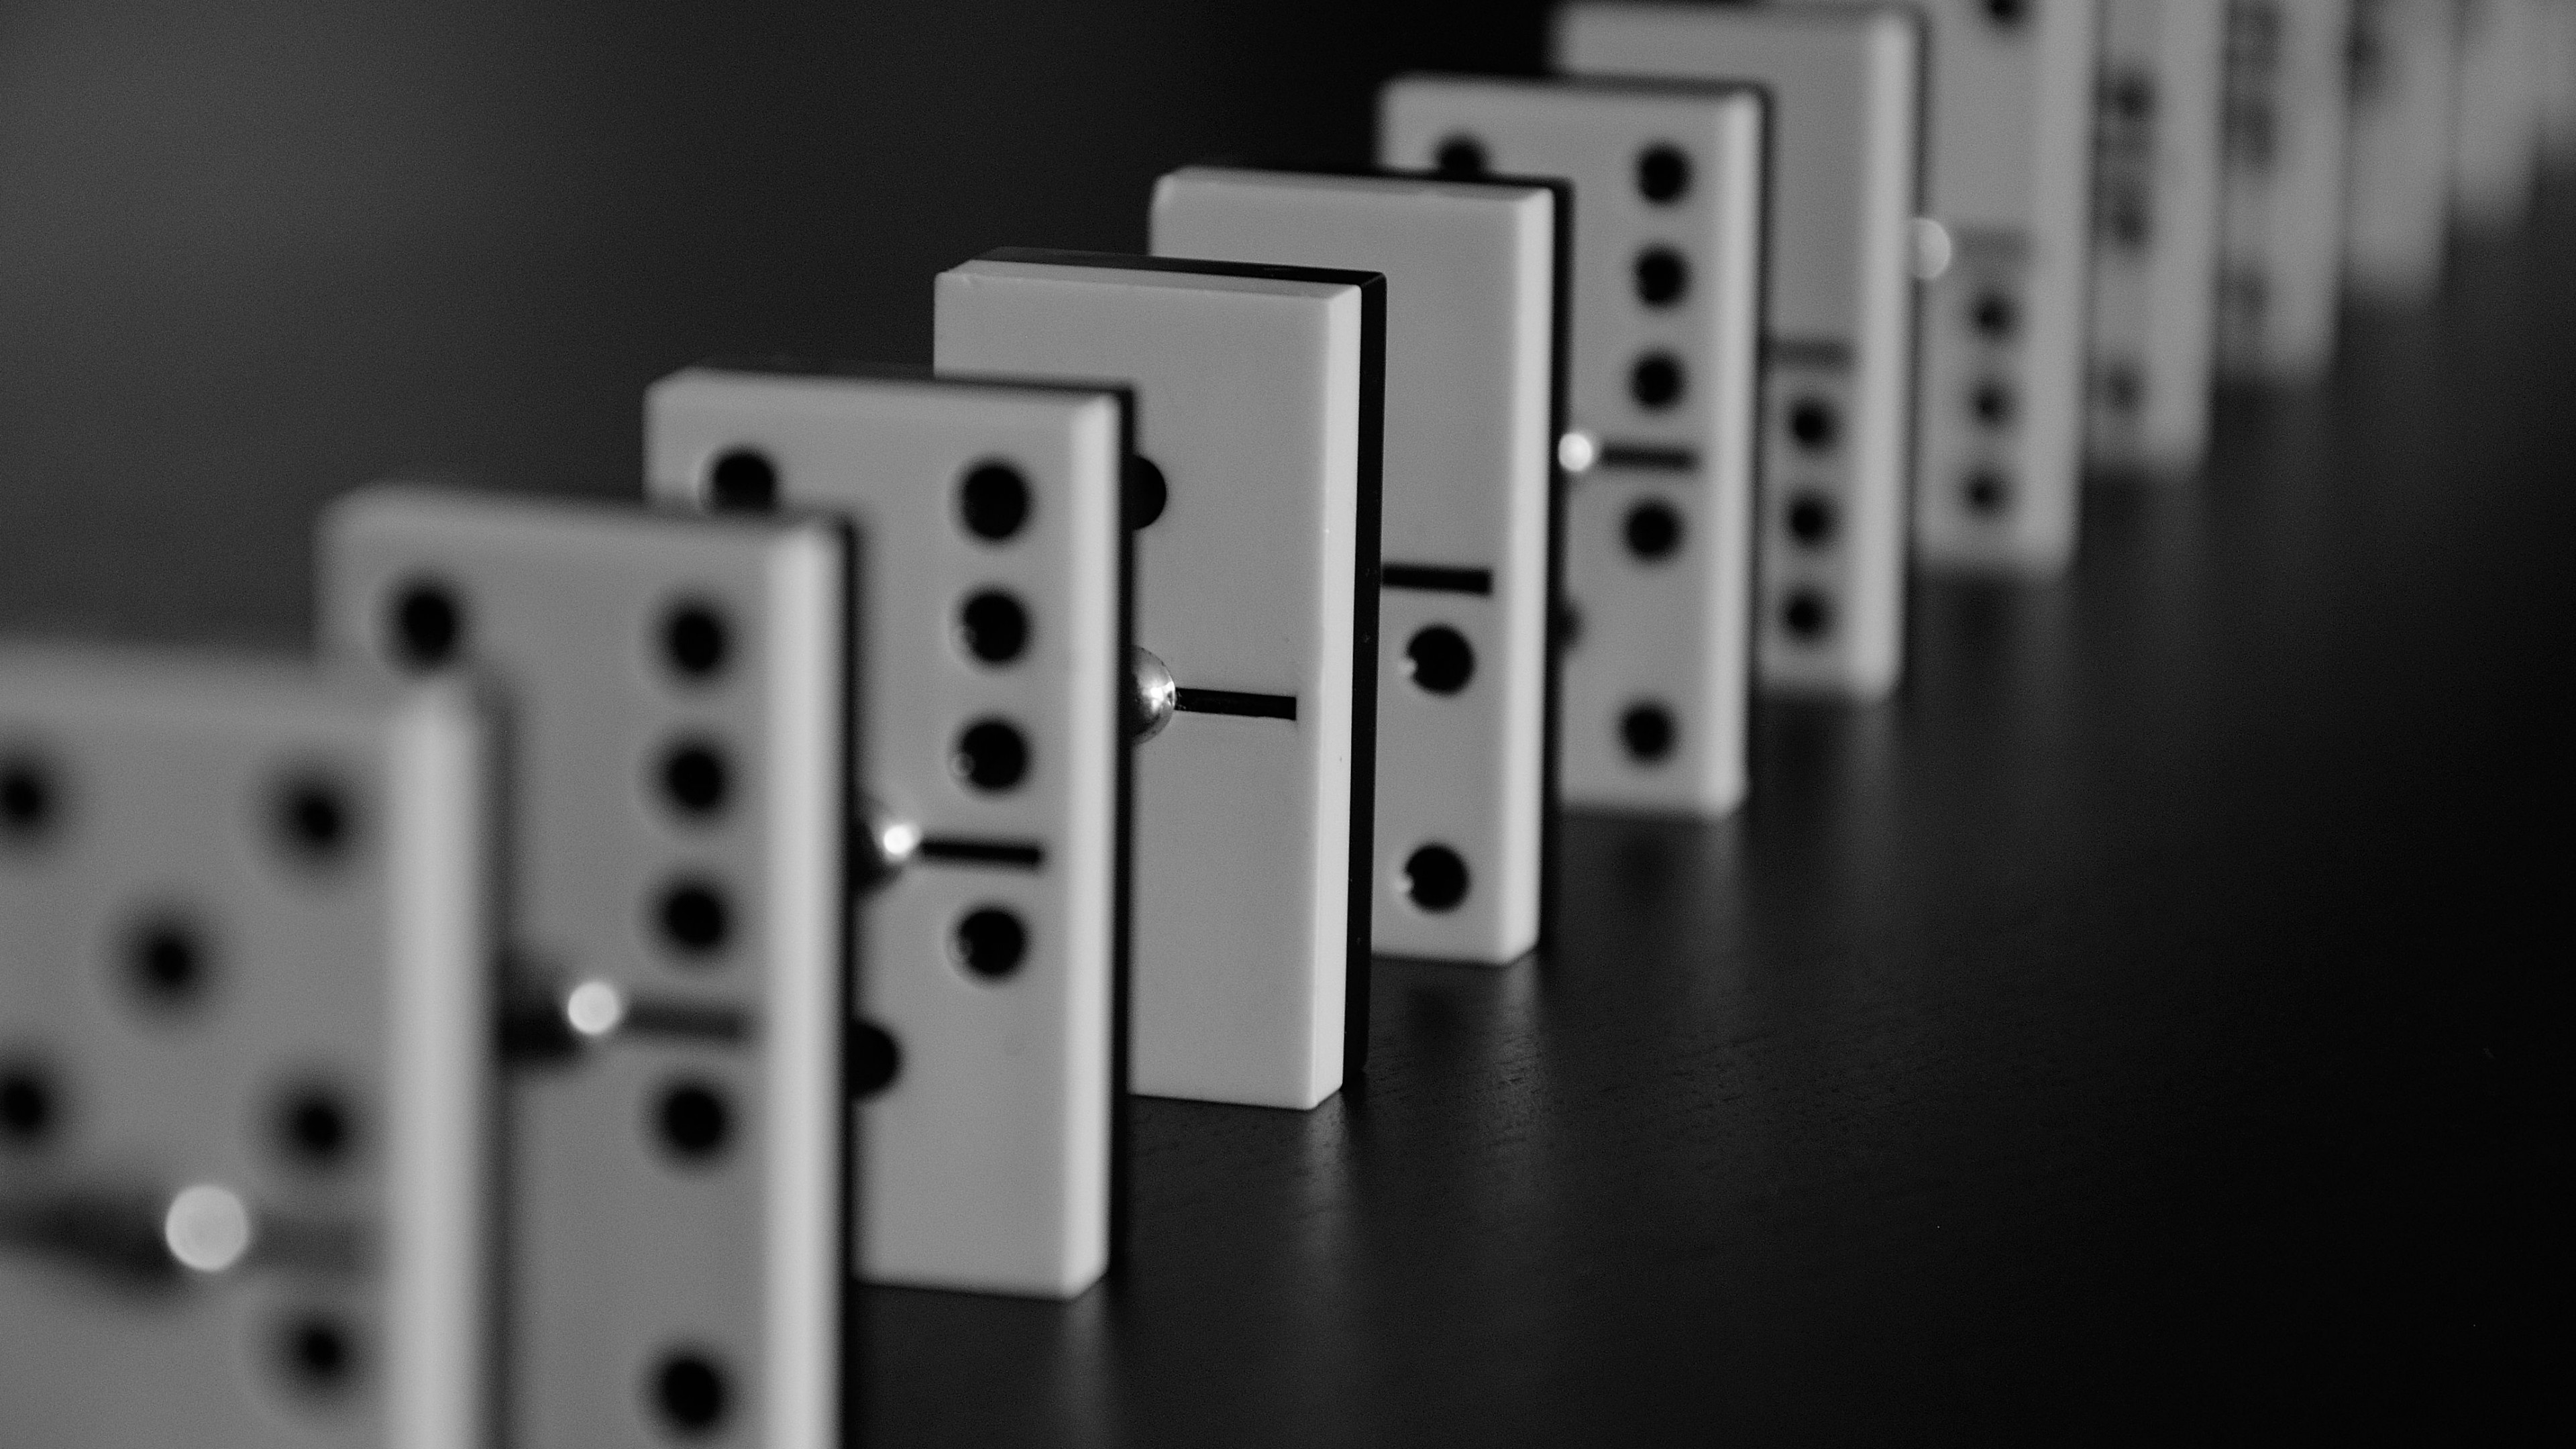 Dominoes: Board Game, Standing rectangular tiles with a line dividing their face into two square ends, Monochrome. 3840x2160 4K Wallpaper.